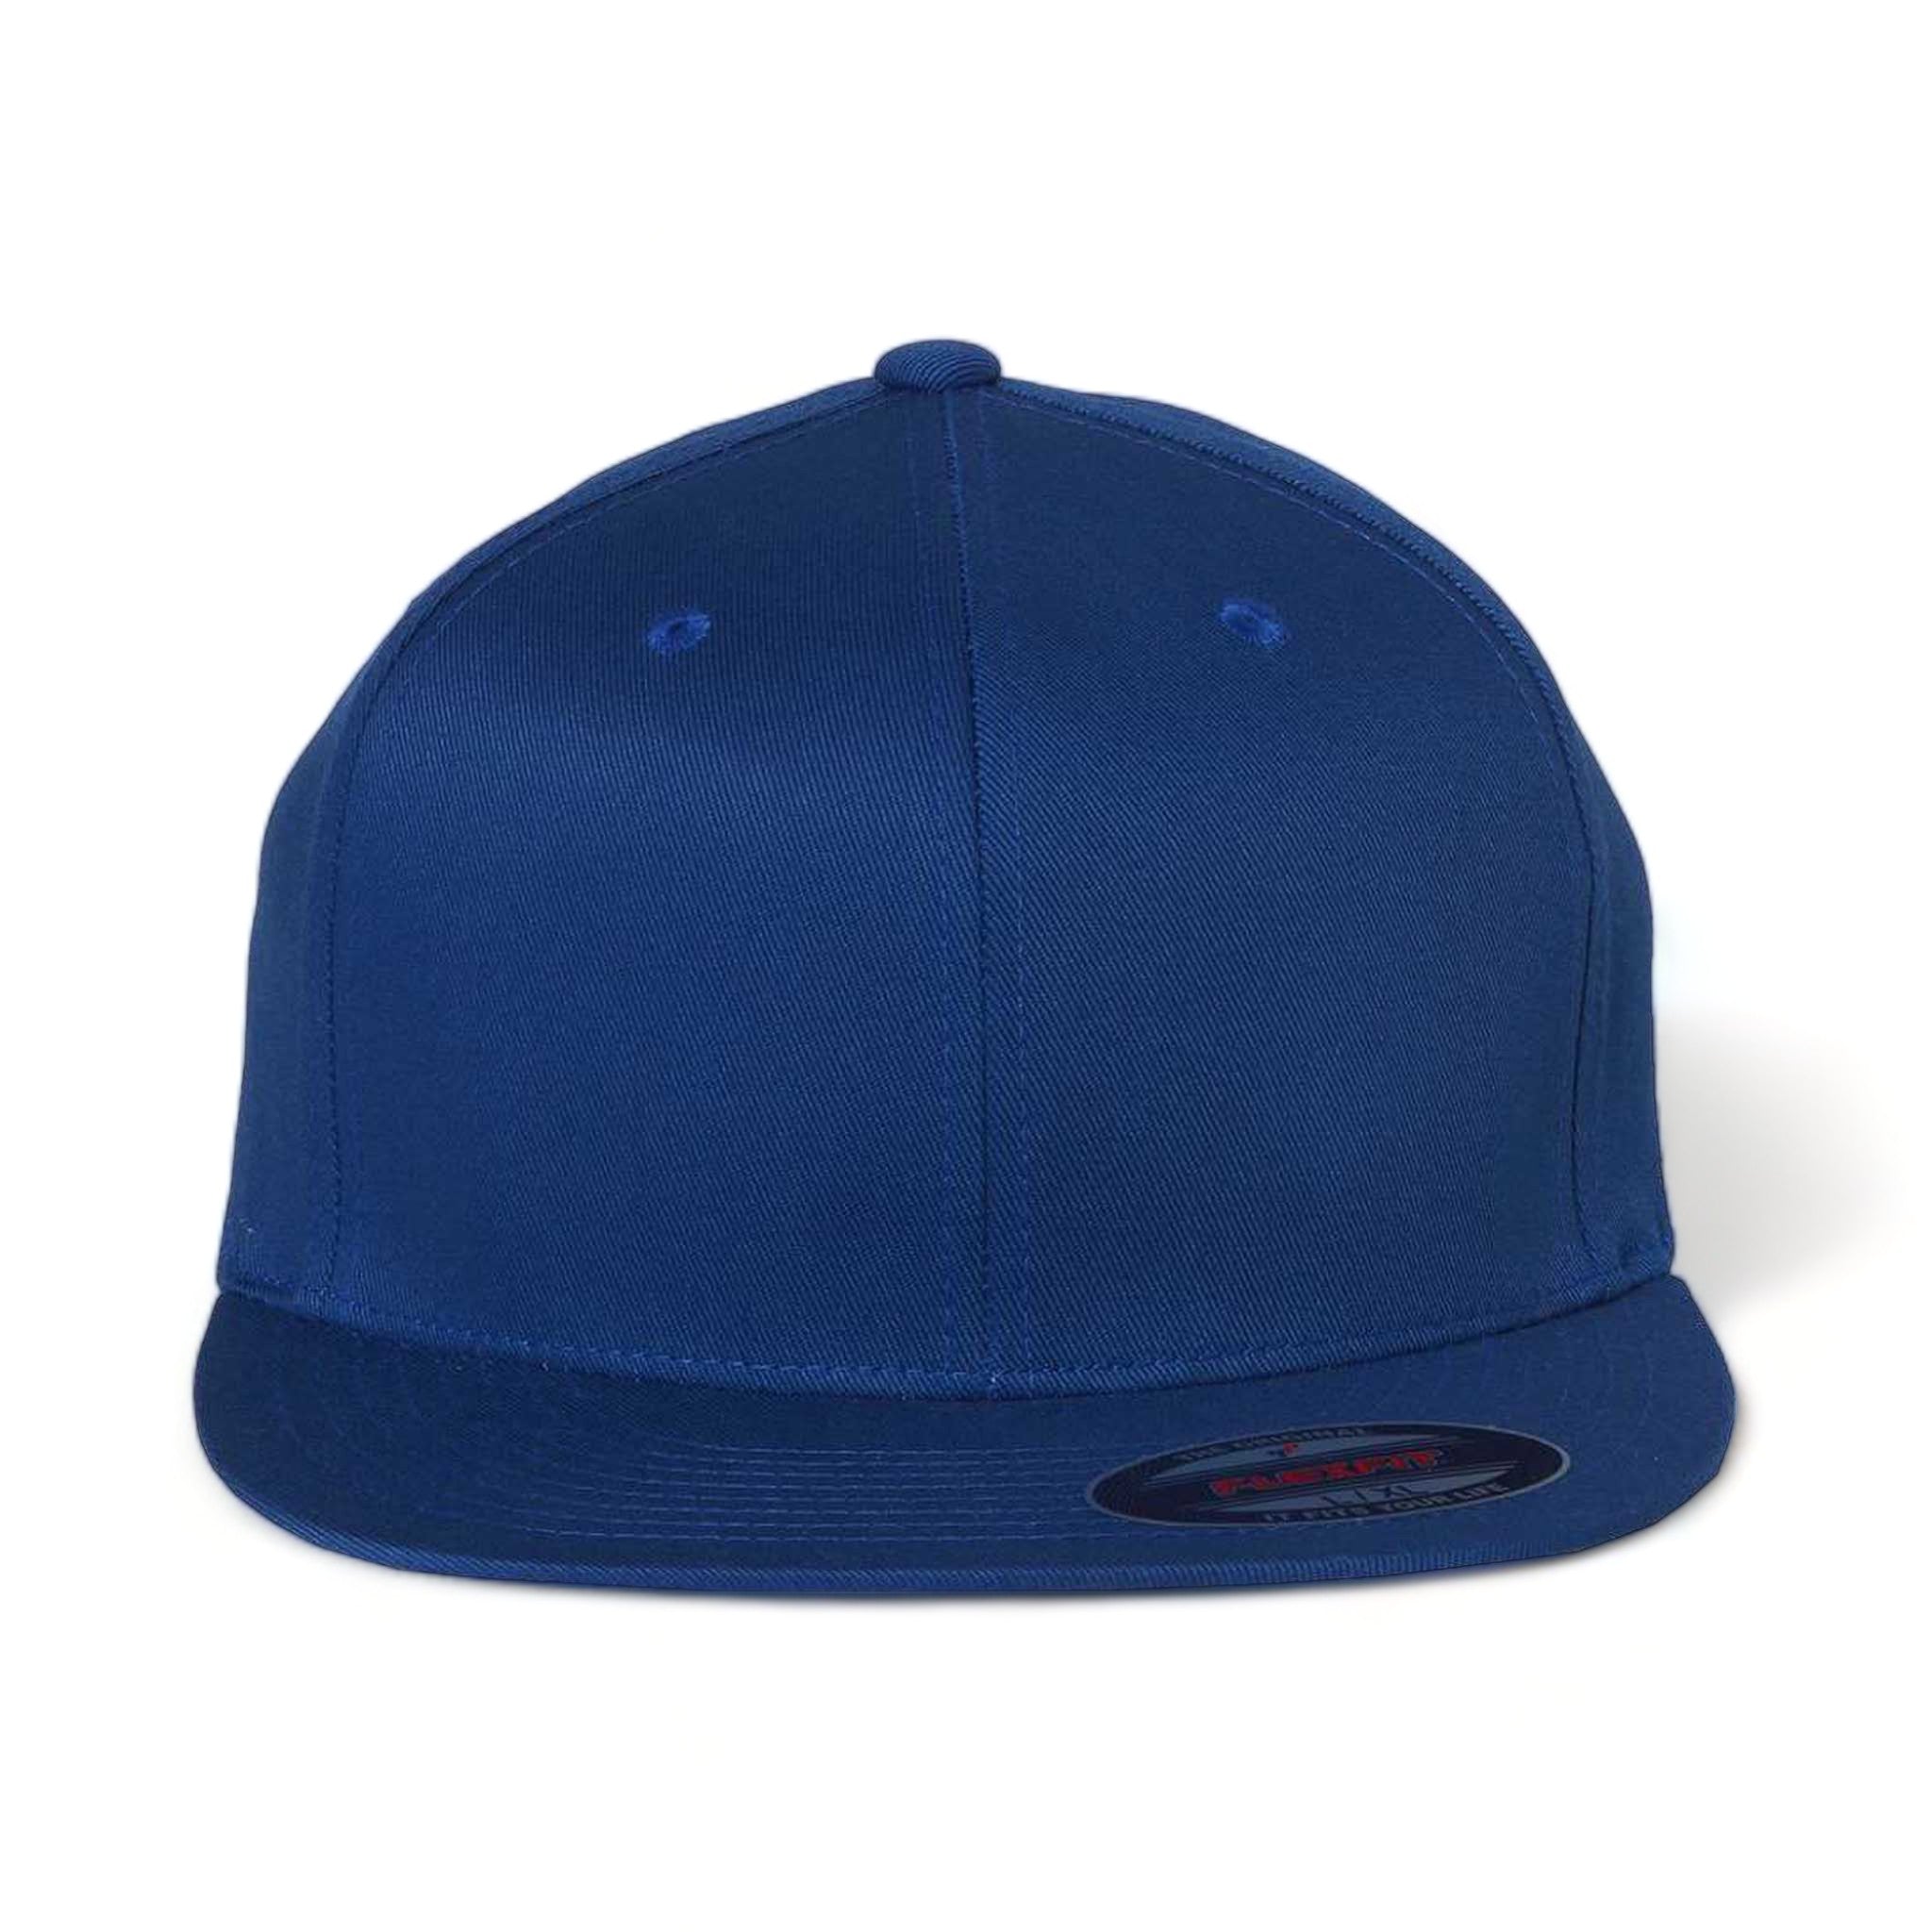 Front view of Flexfit 6297f custom hat in royal blue